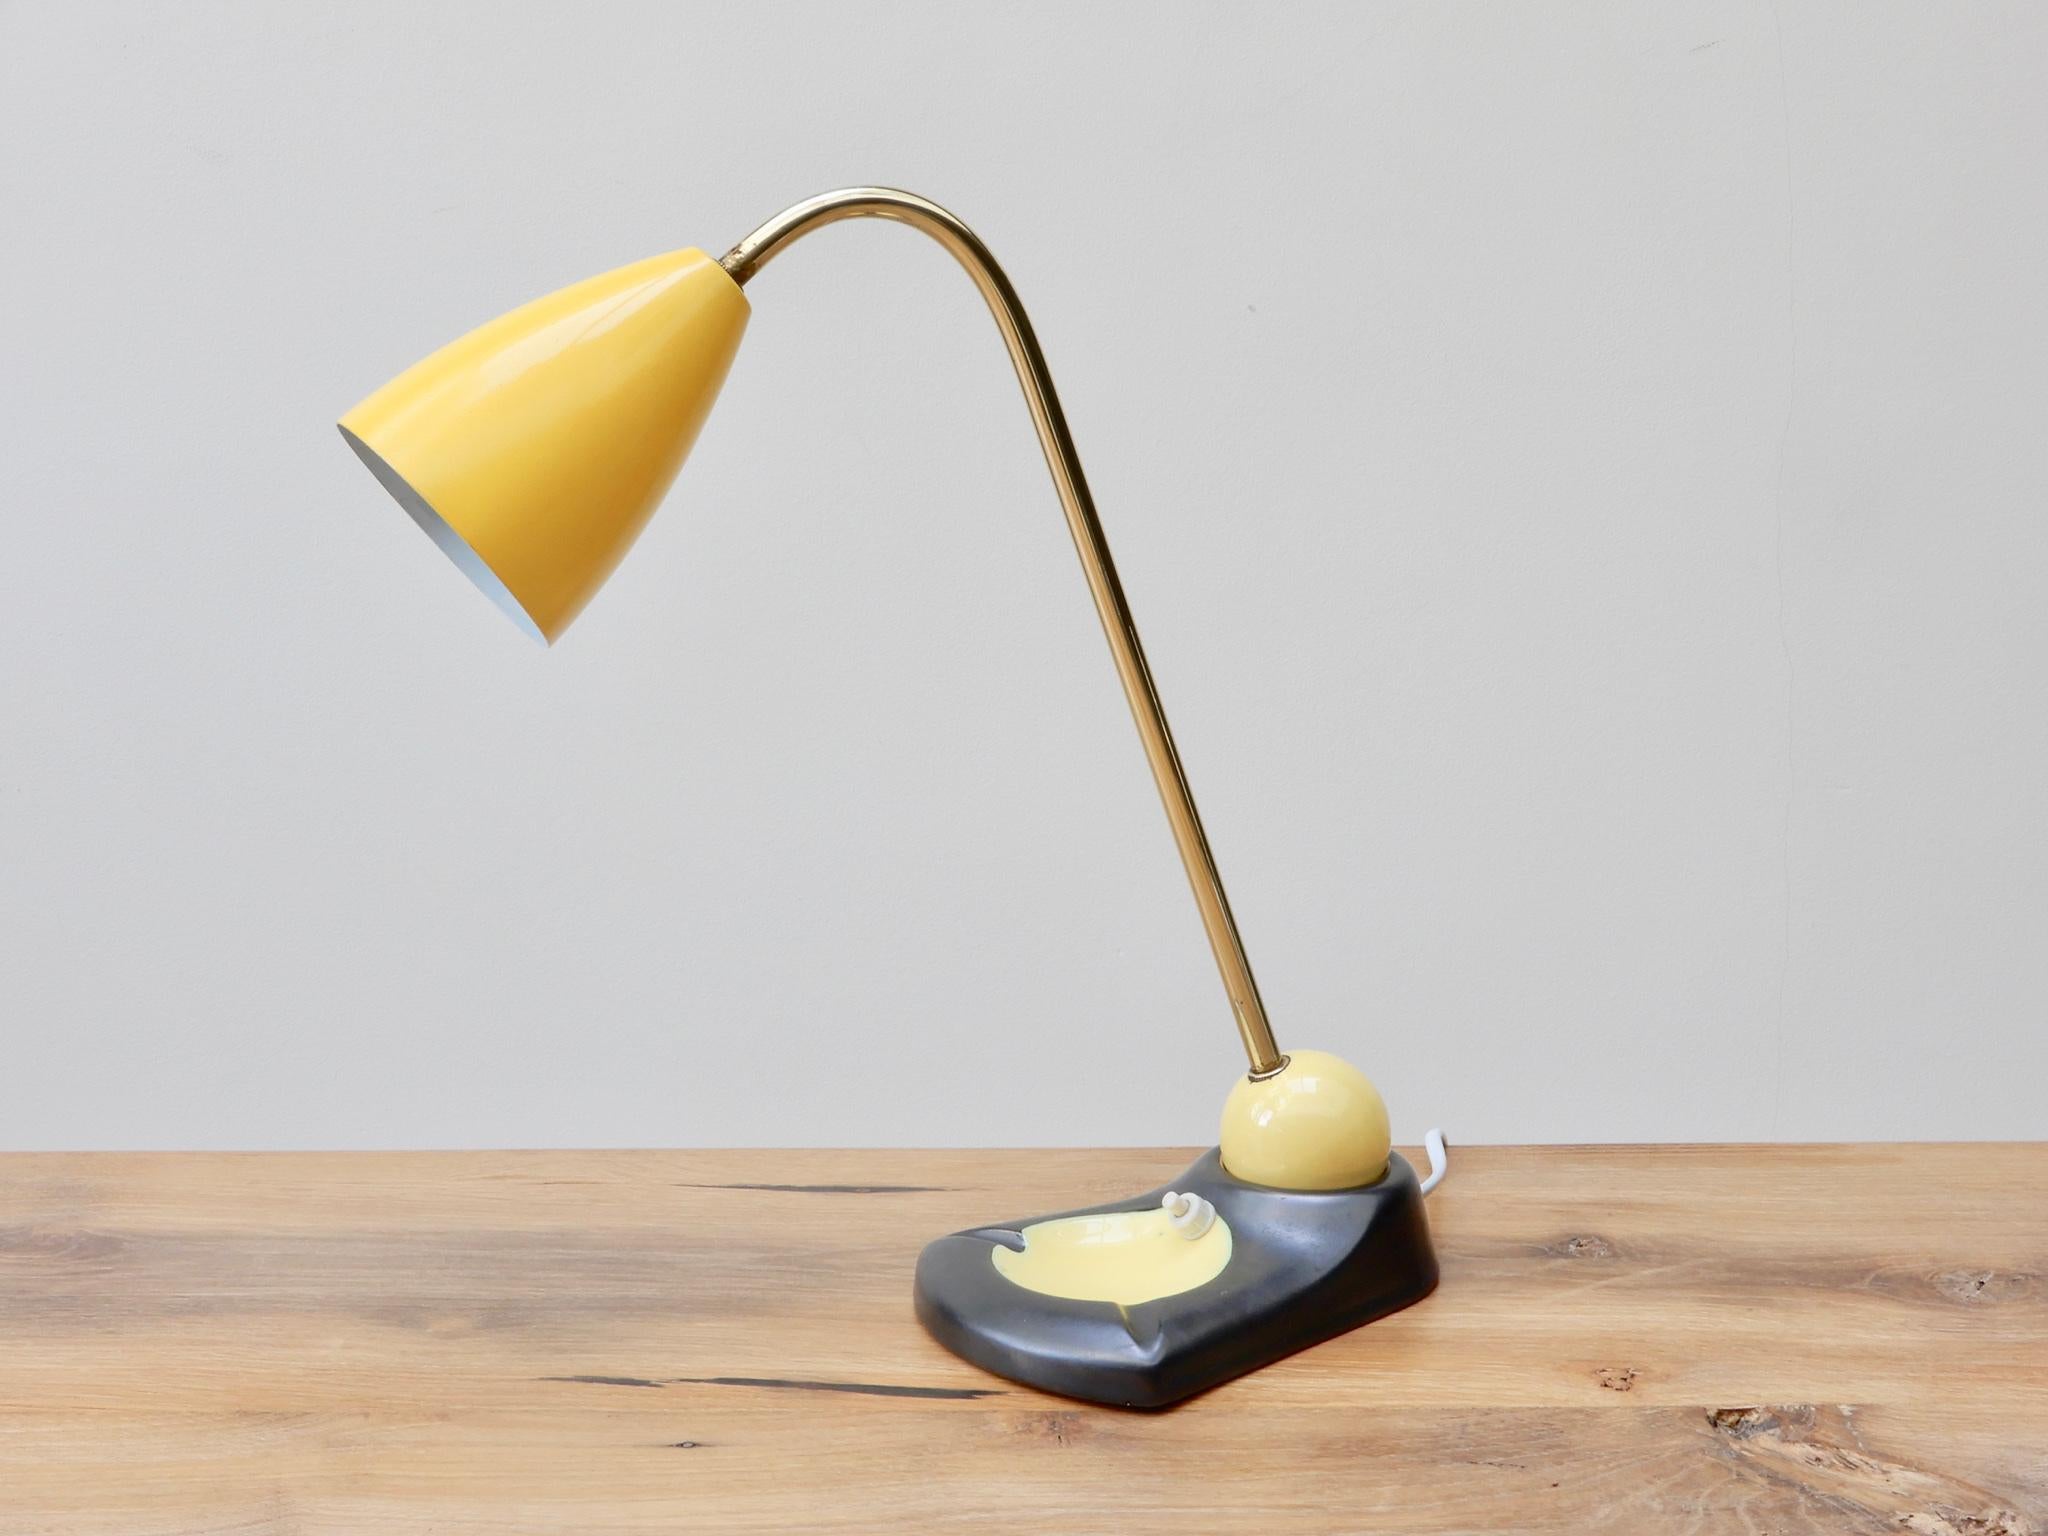 Midcentury adjustable brass table lamp / vide poche or ashtray with a yellow lacquered metal shade.